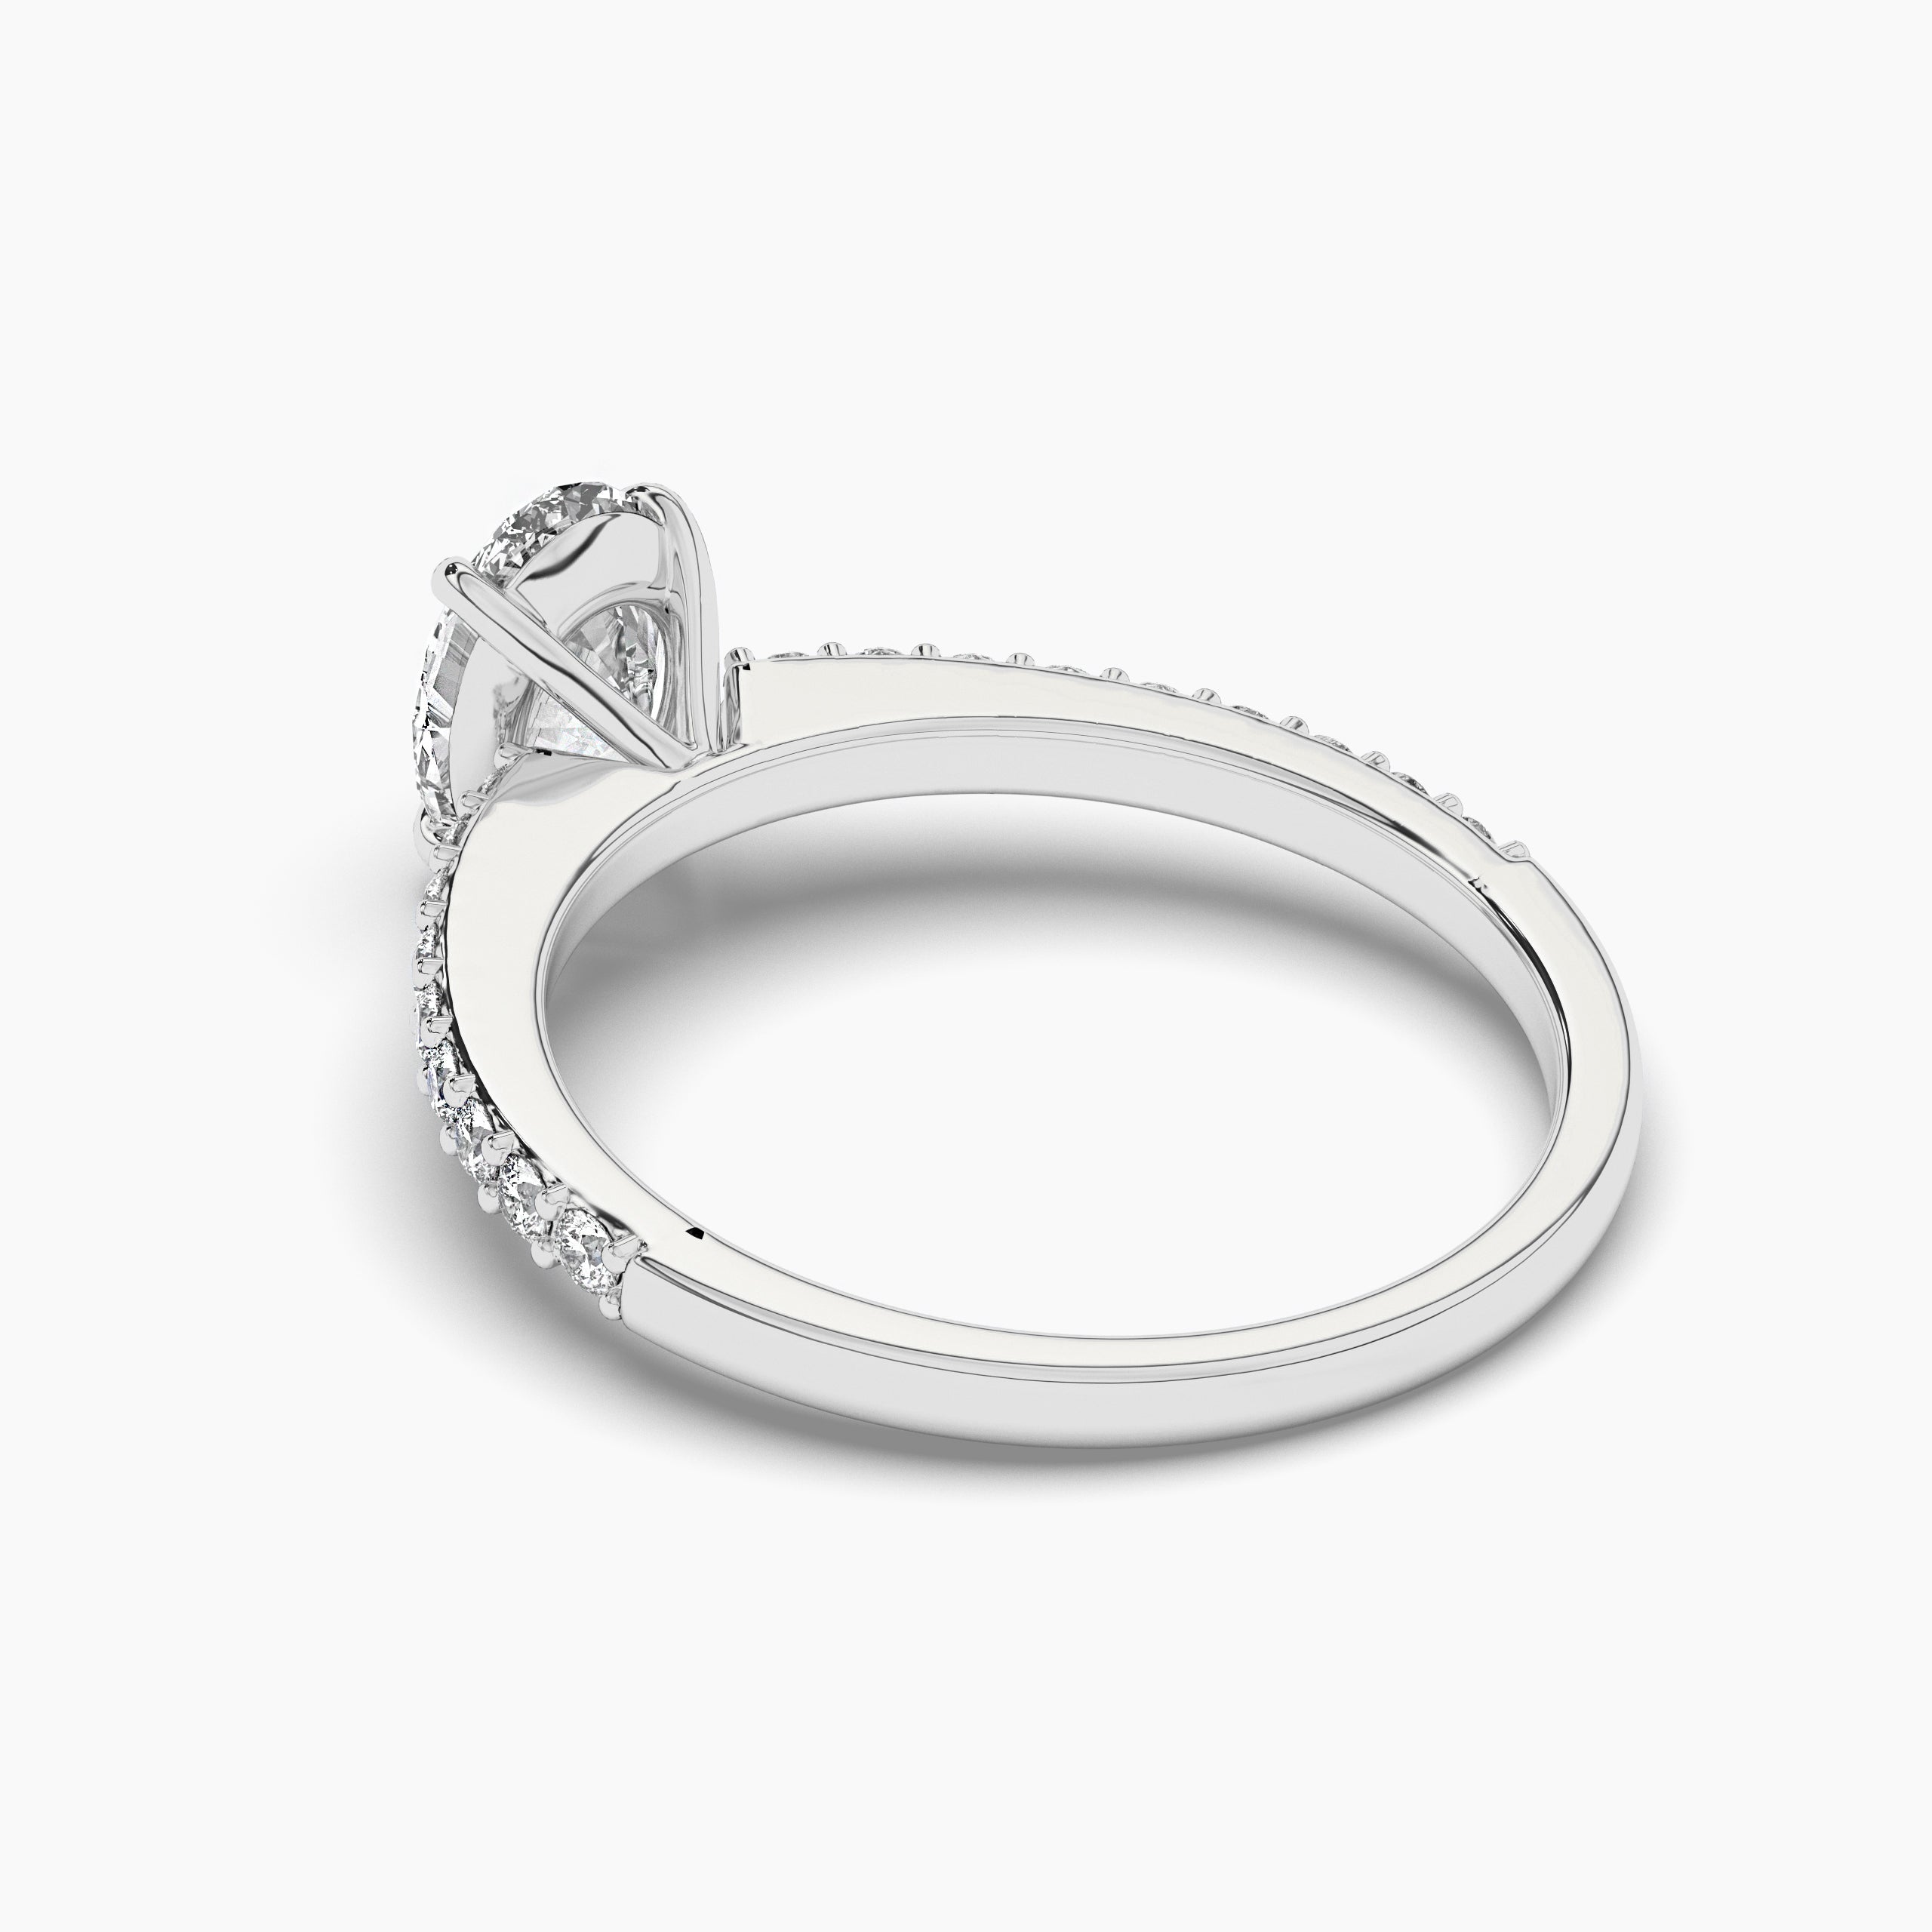  oval engagement ring with solitaire stones white gold